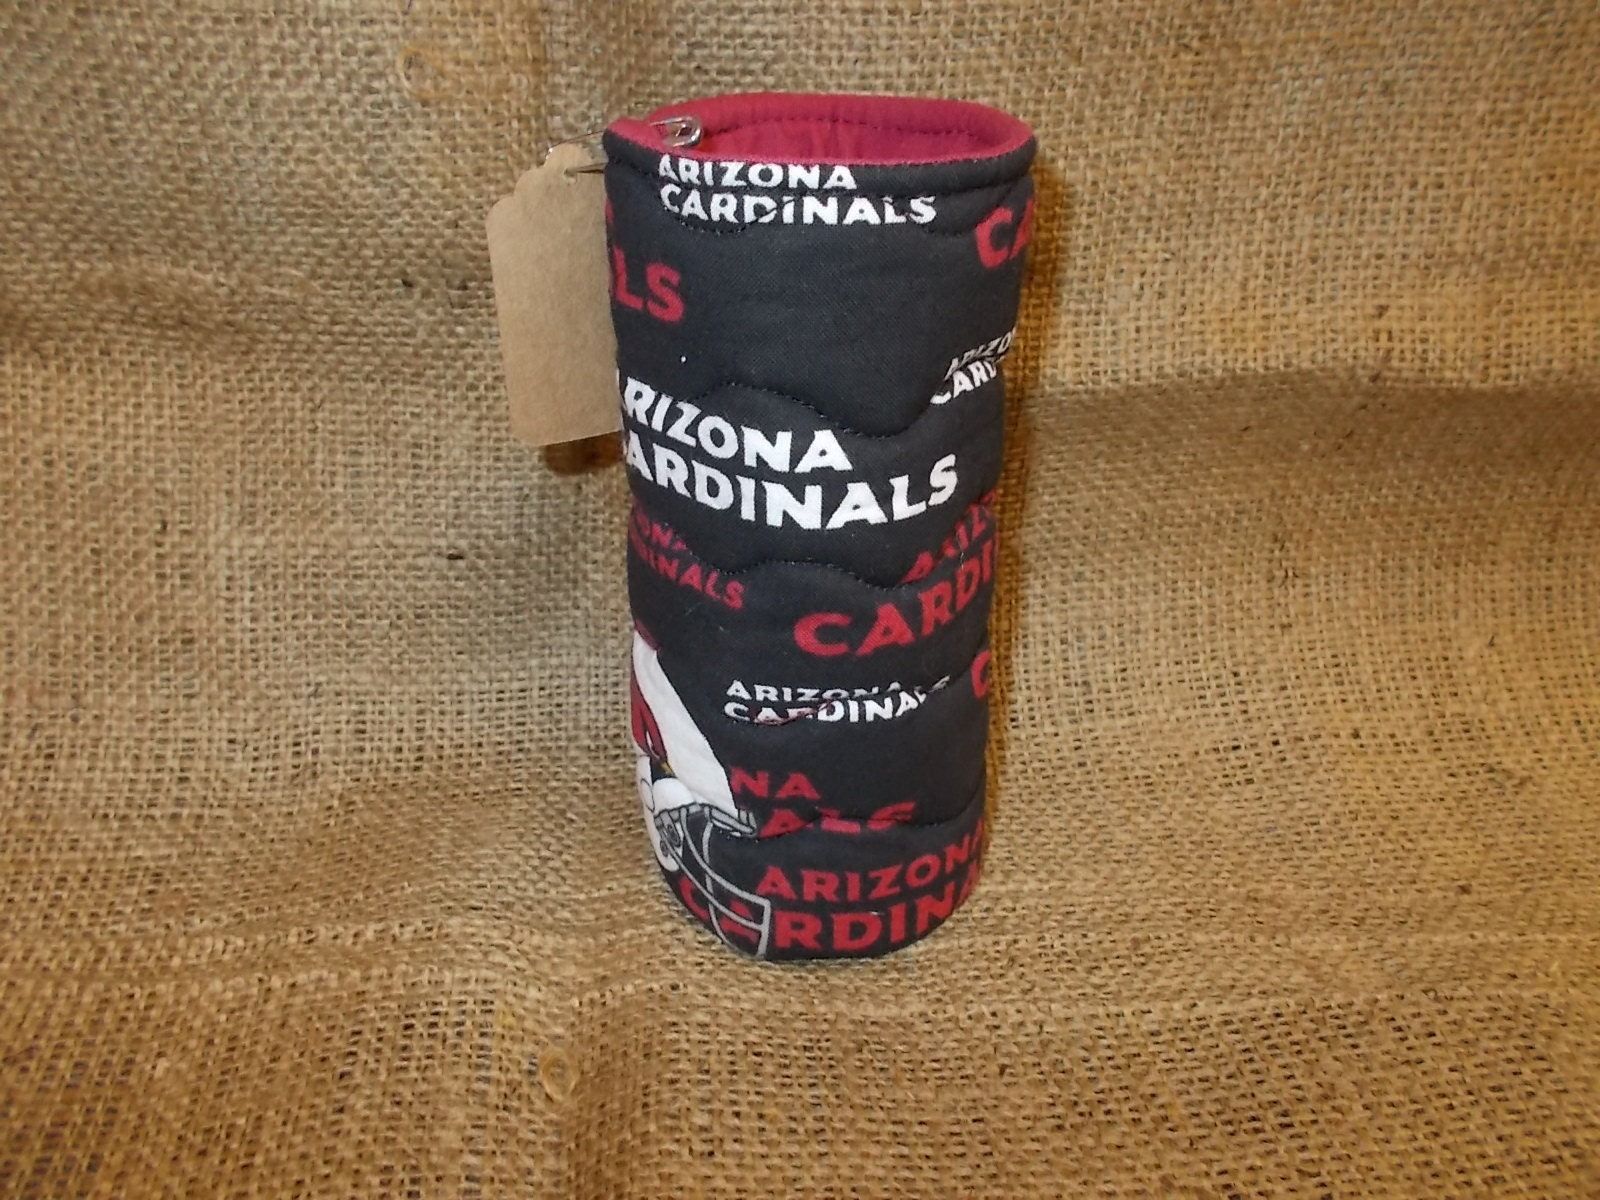 NFL Arizona Cardinals Personalized Stainless Insulated Can Holder